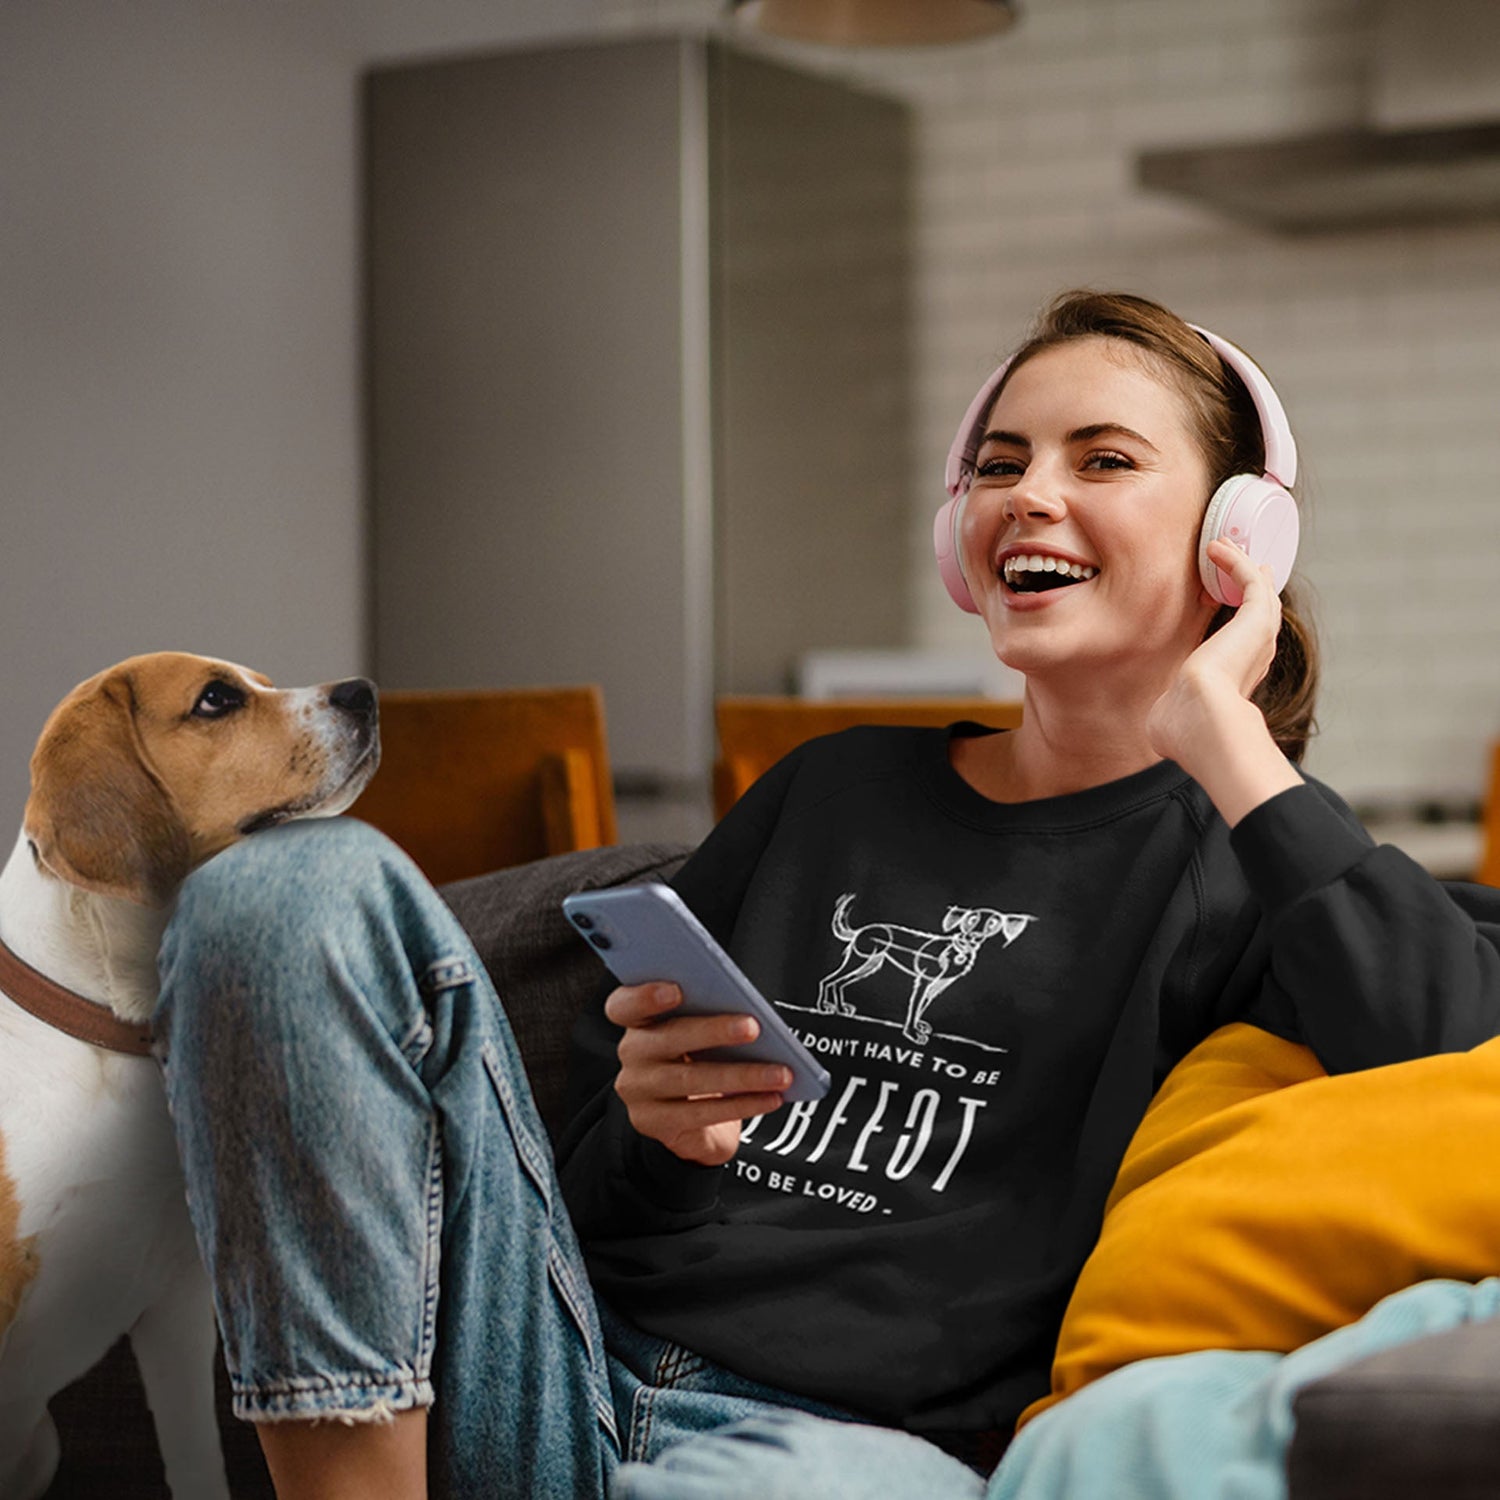 A young woman wearing headphones listens to her music smiling as she holds her phone. Beside her, her Beagle companion sits contentedly on the couch, resting its head against her uplifted knee.